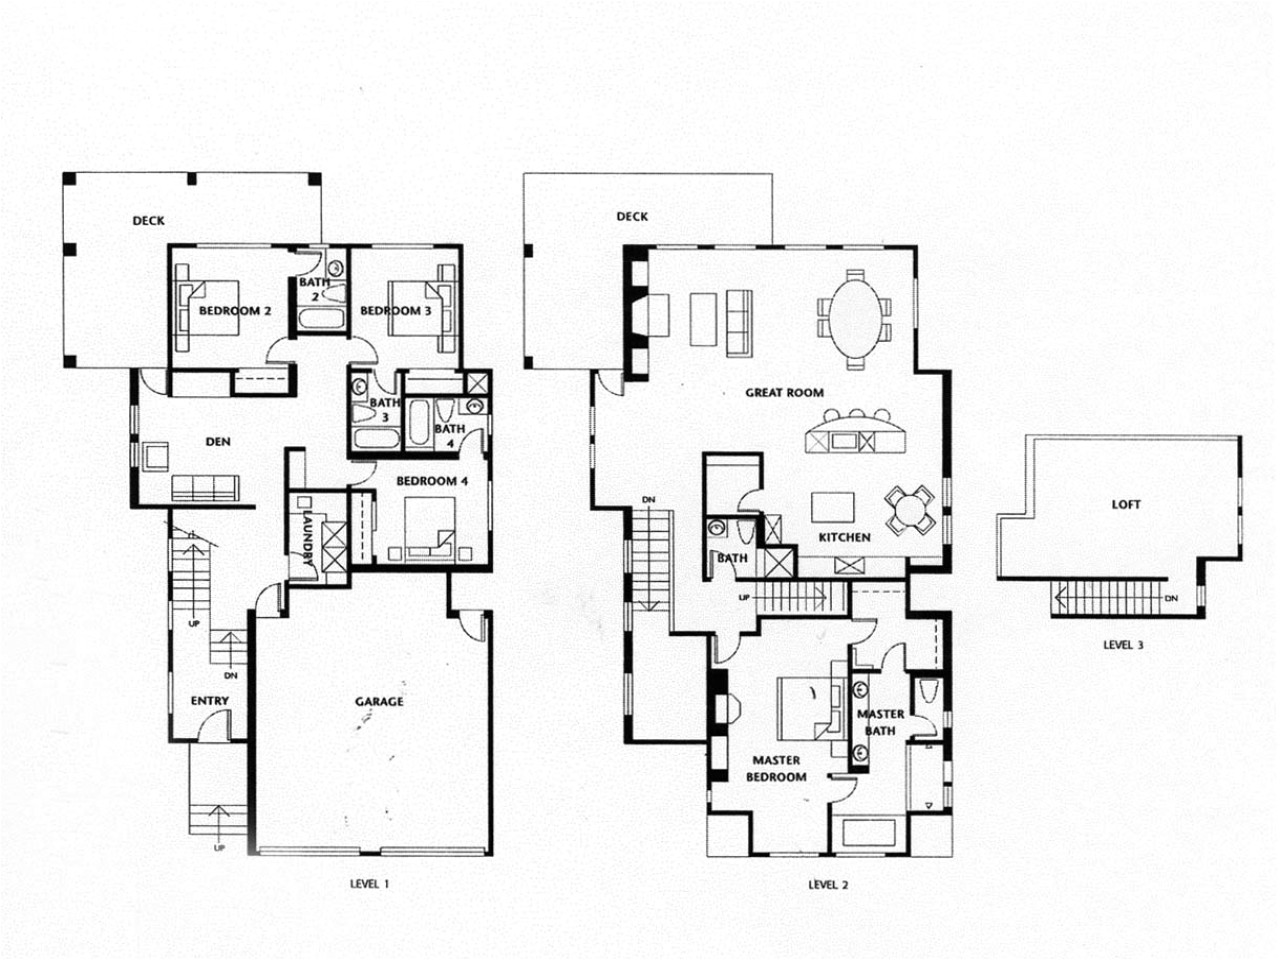 7d728bd3ed223bbd luxury homes floor plans 4 bedrooms small luxury house plans